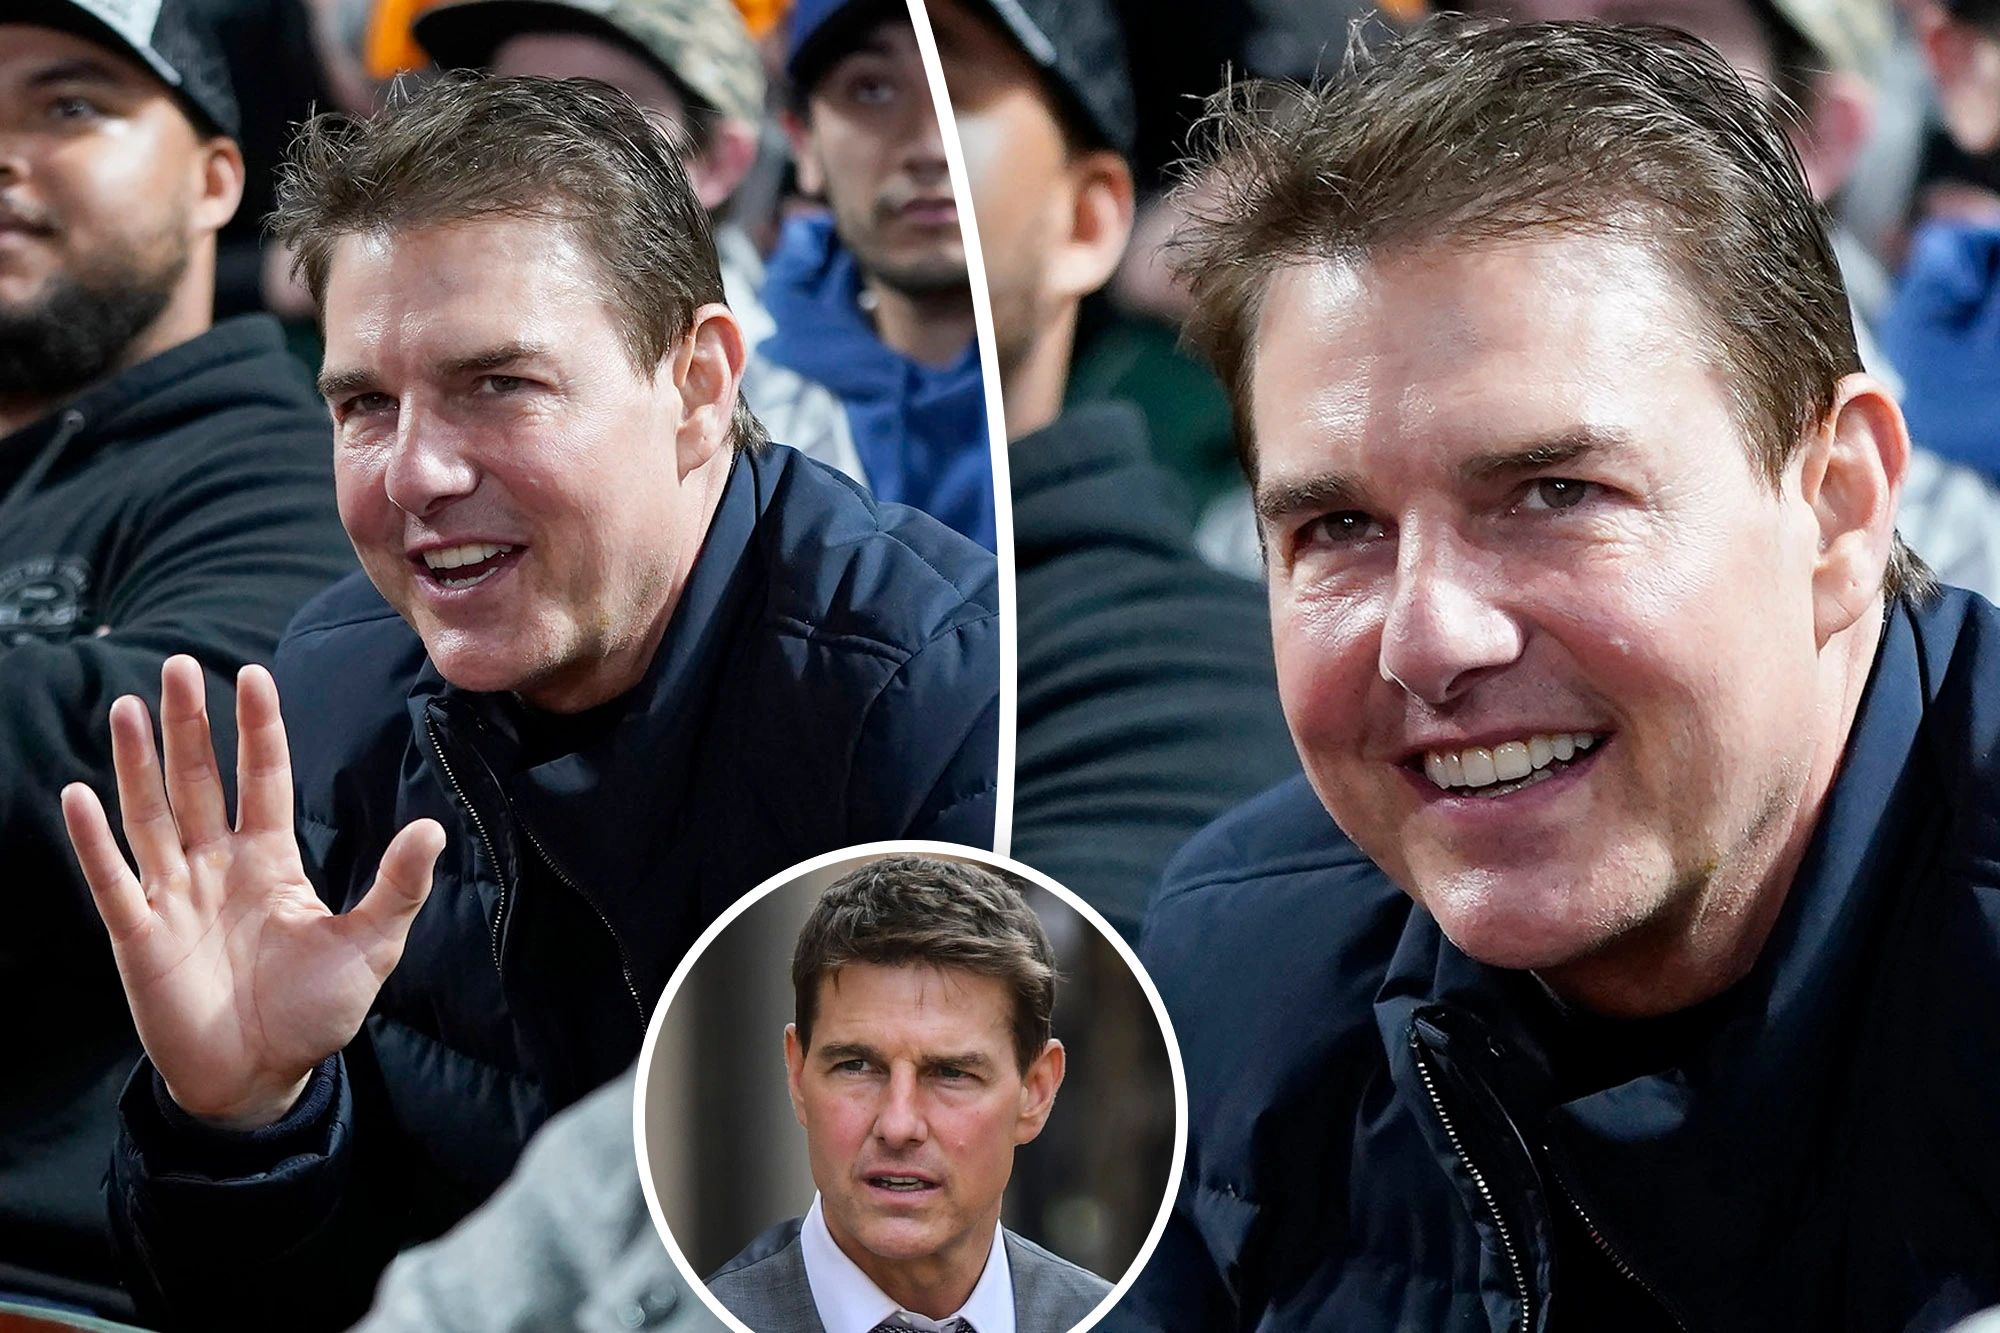 Tom Cruise looks like a whole new person at baseball game